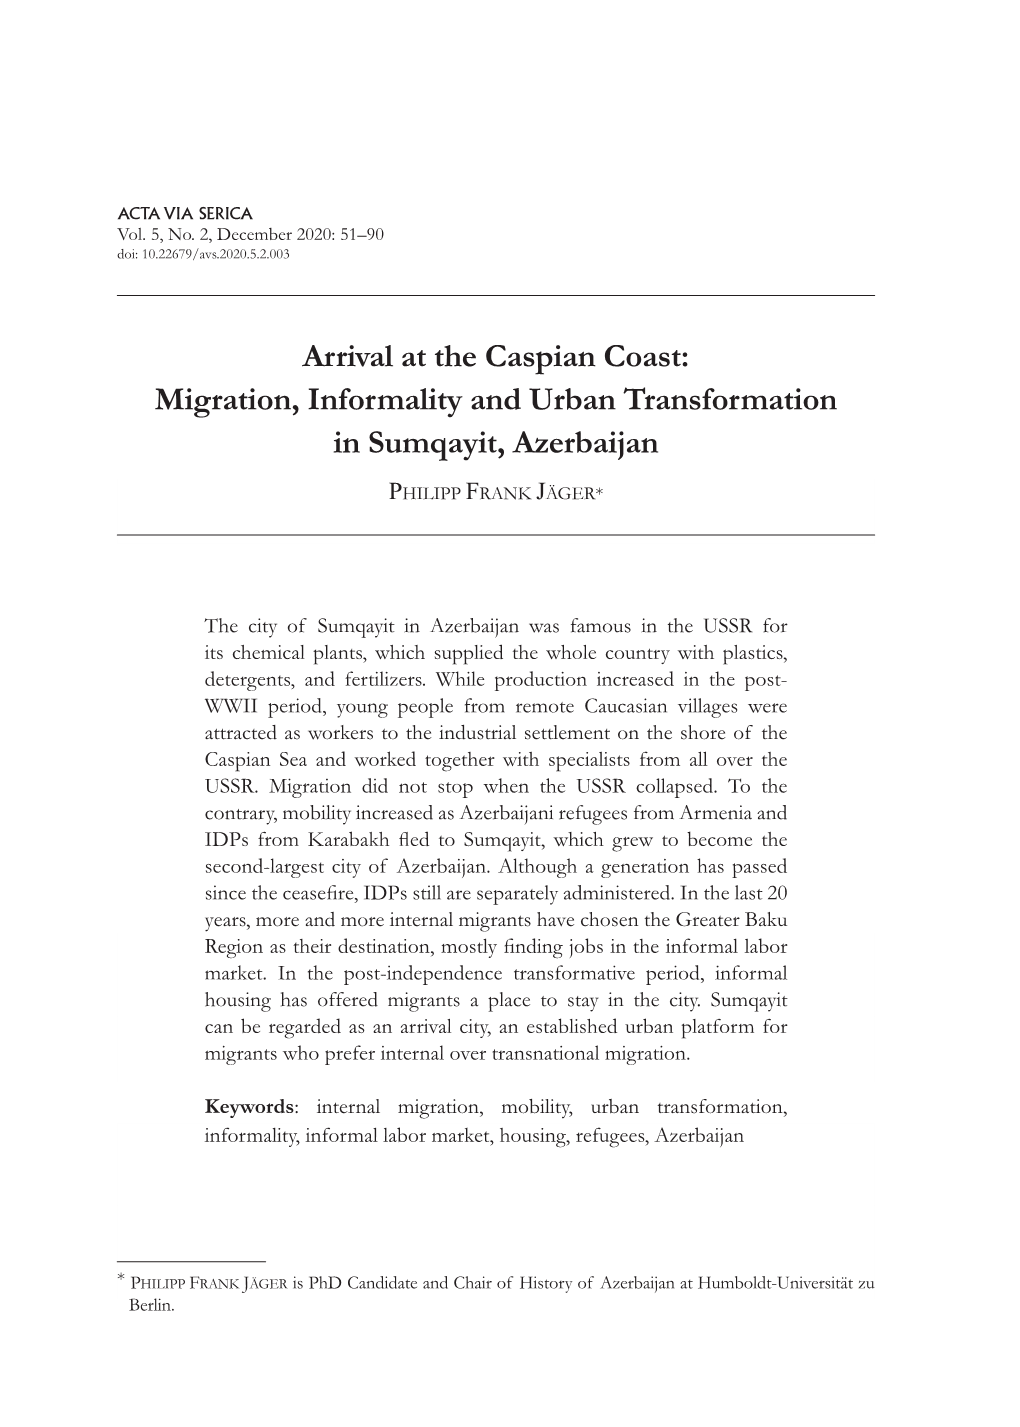 Arrival at the Caspian Coast: Migration, Informality and Urban Transformation in Sumqayit, Azerbaijan